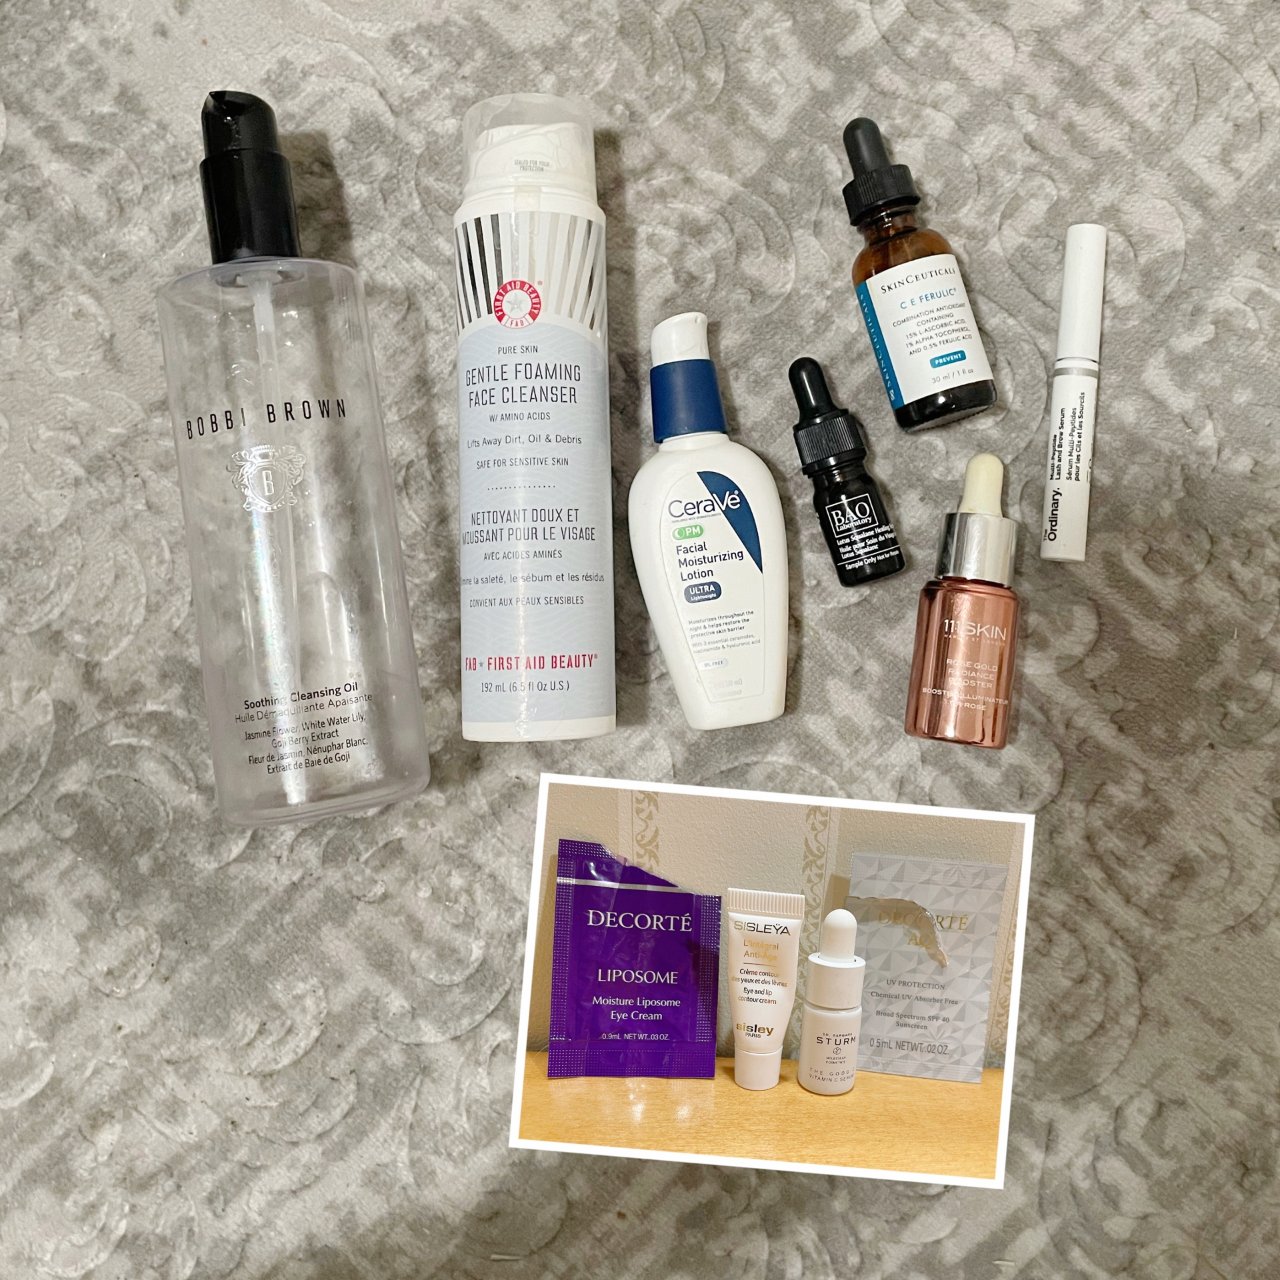 Bobbi Brown 芭比·波朗,First Aid Beauty,SkinCeuticals 杜克,CeraVe,111Skin